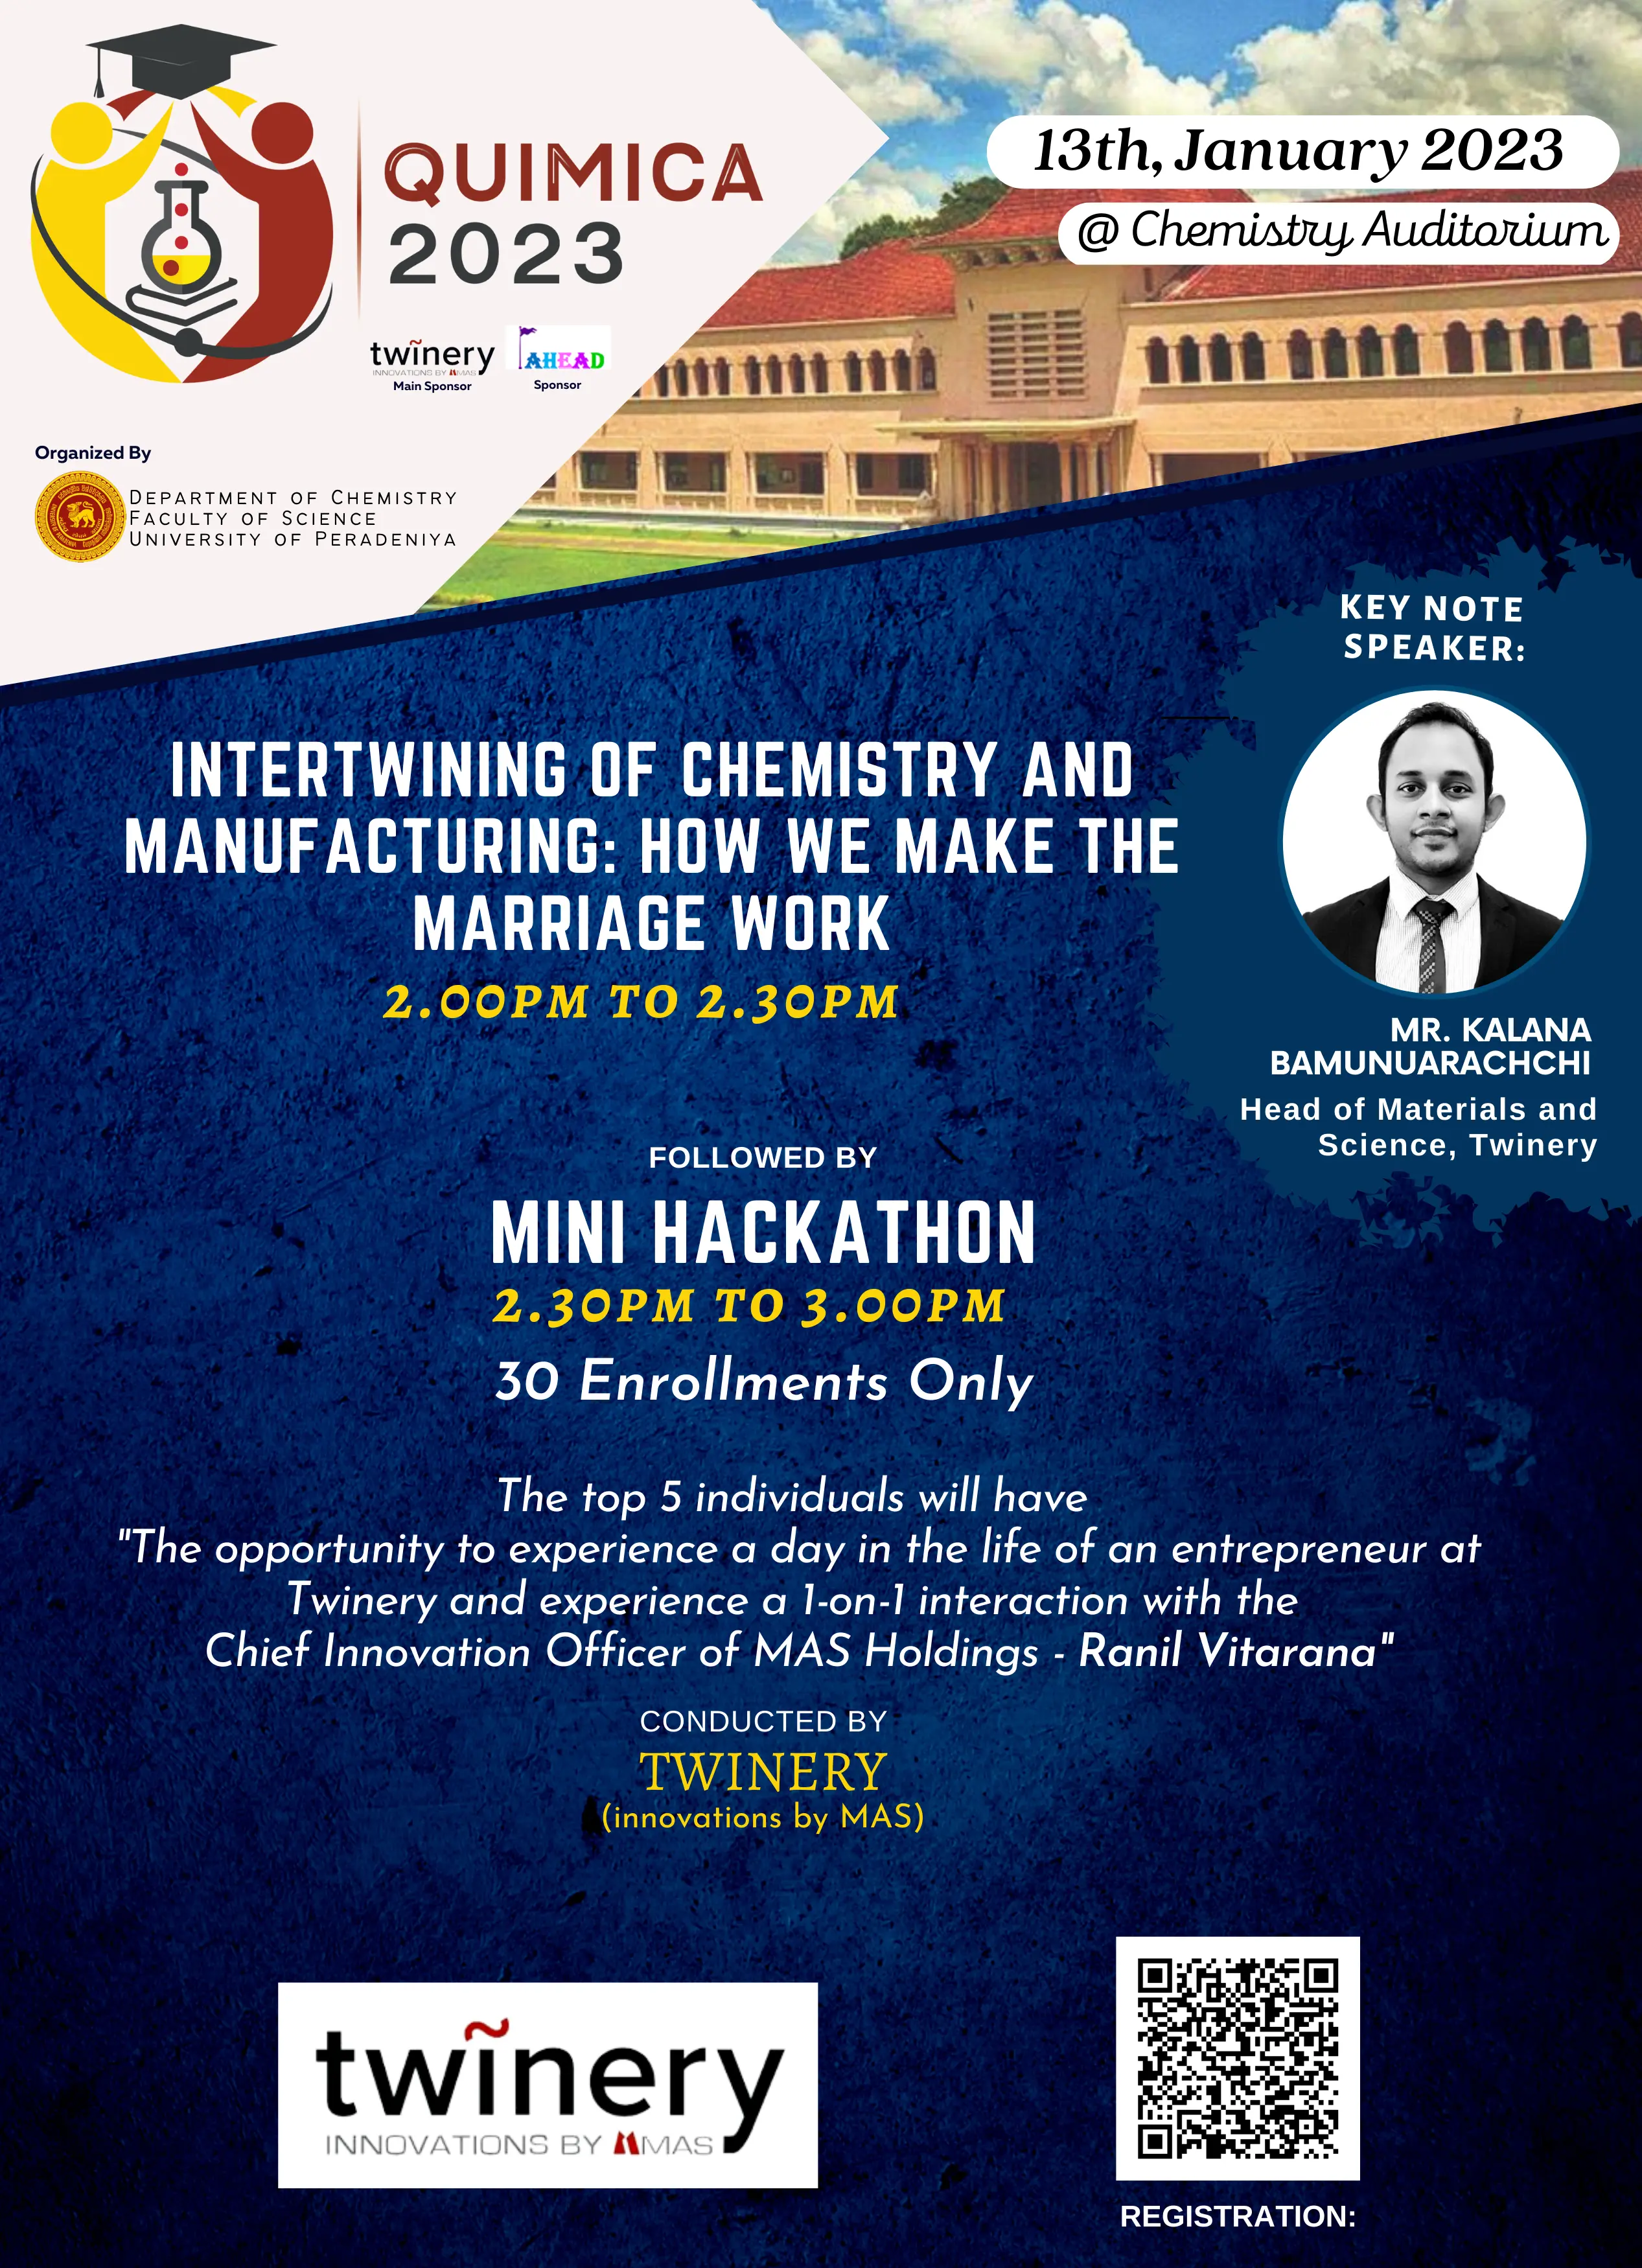 Intertwining of Chemistry and Manufacturing